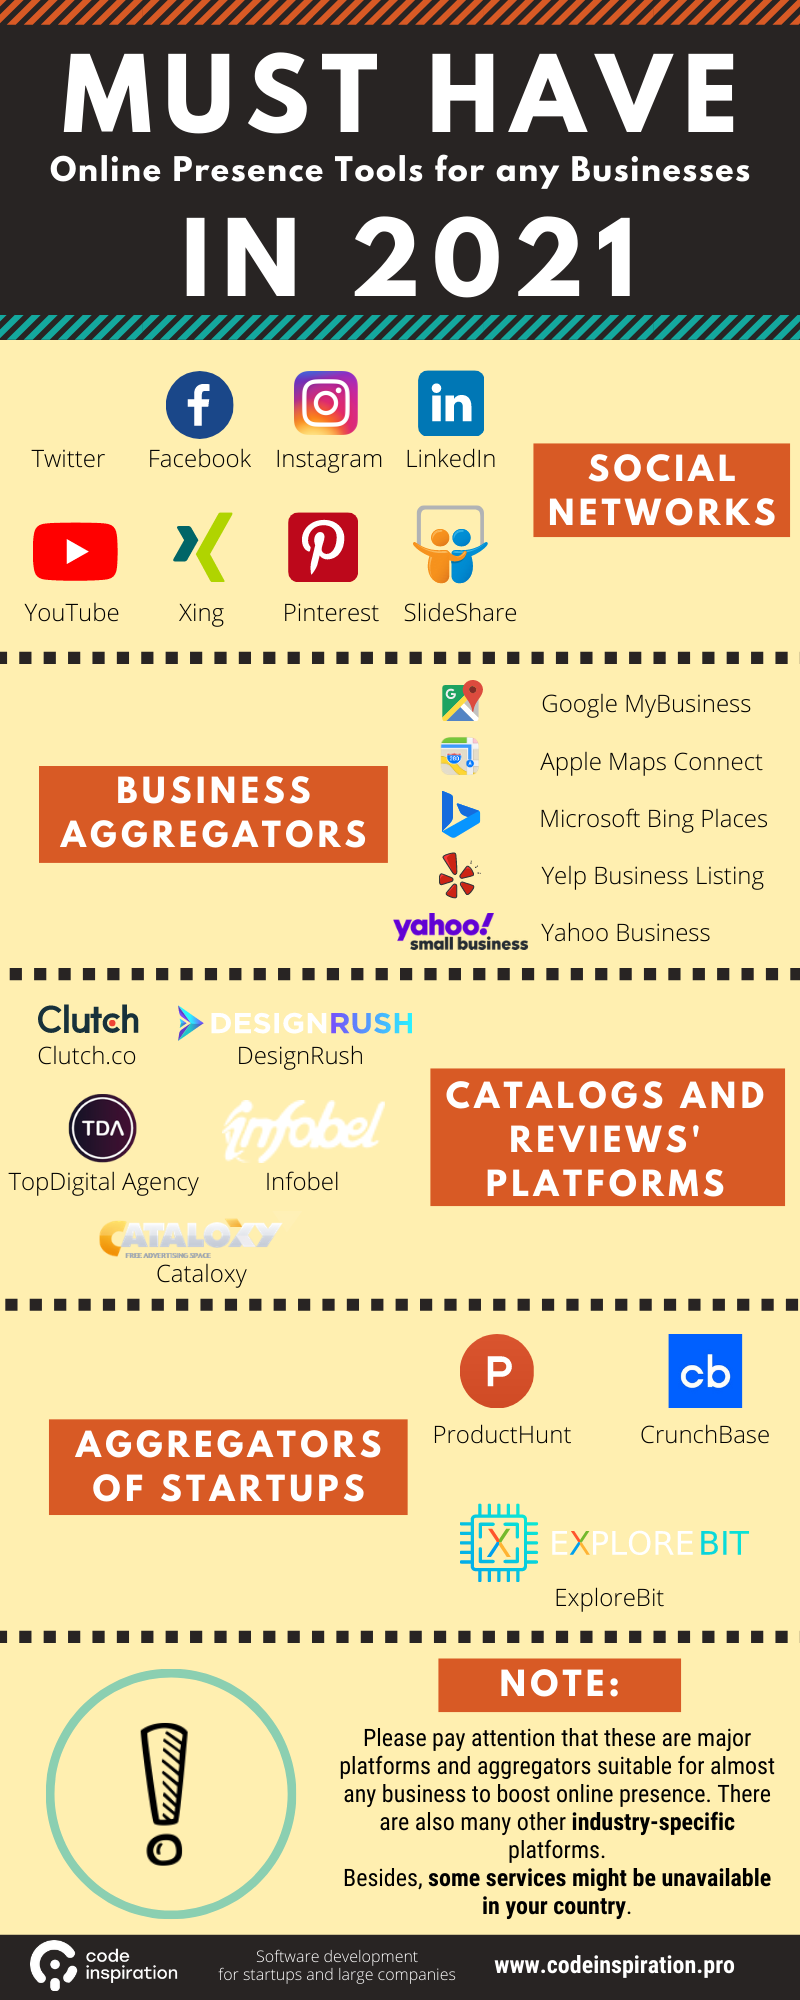 Get listed. A set of aggregators to claim business profile